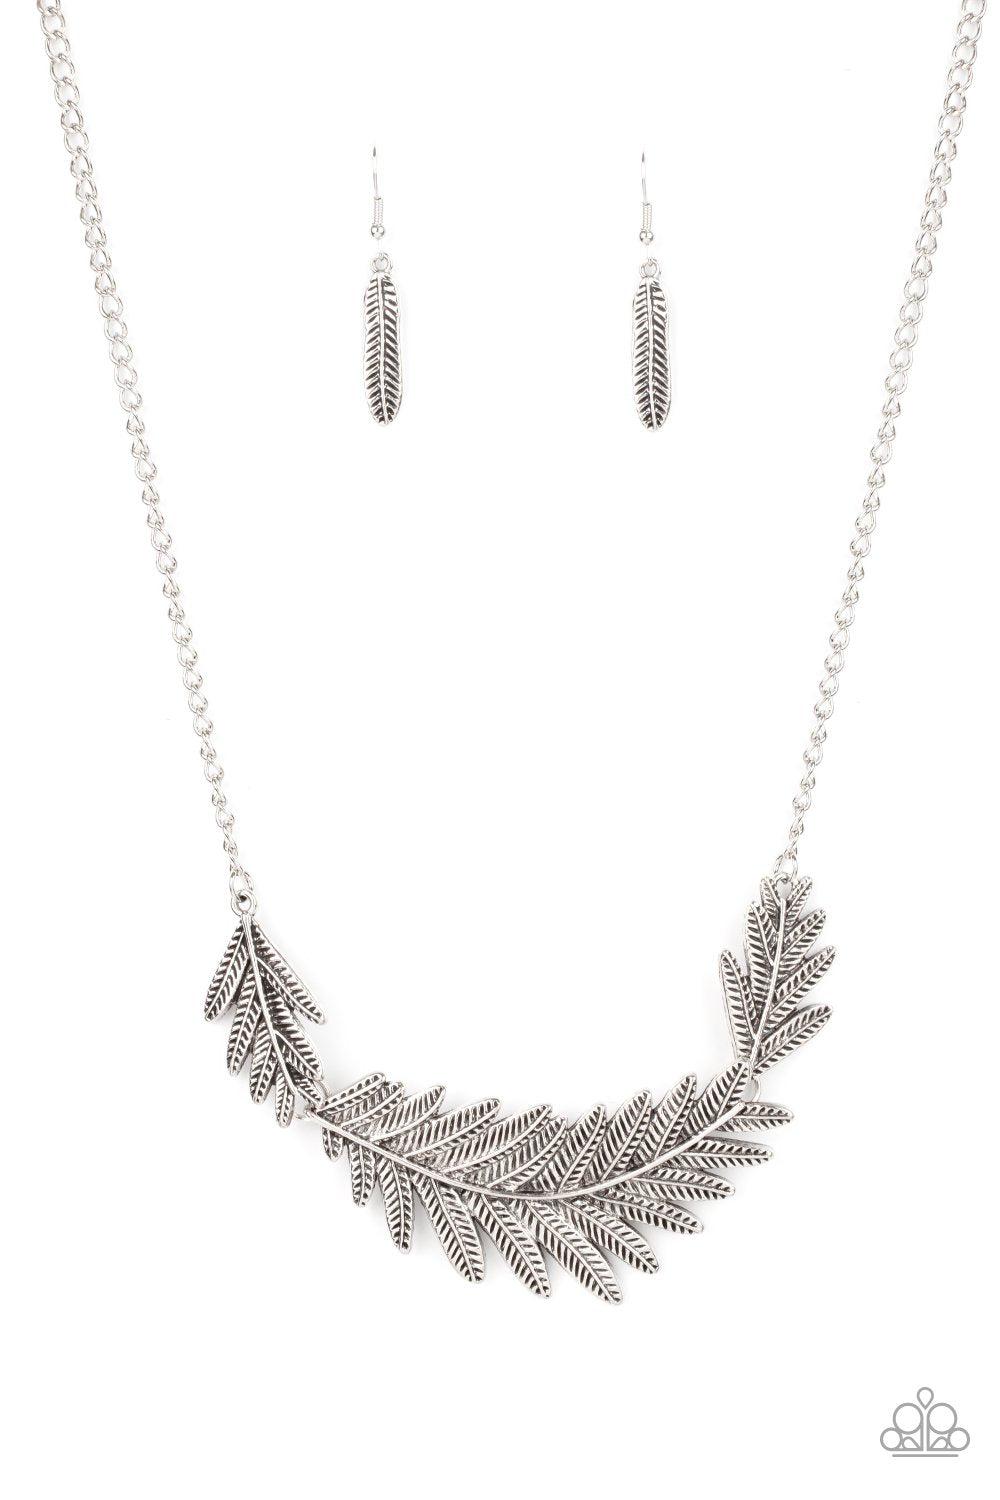 Queen of the QUILL Silver Feather Necklace - Paparazzi Accessories- lightbox - CarasShop.com - $5 Jewelry by Cara Jewels